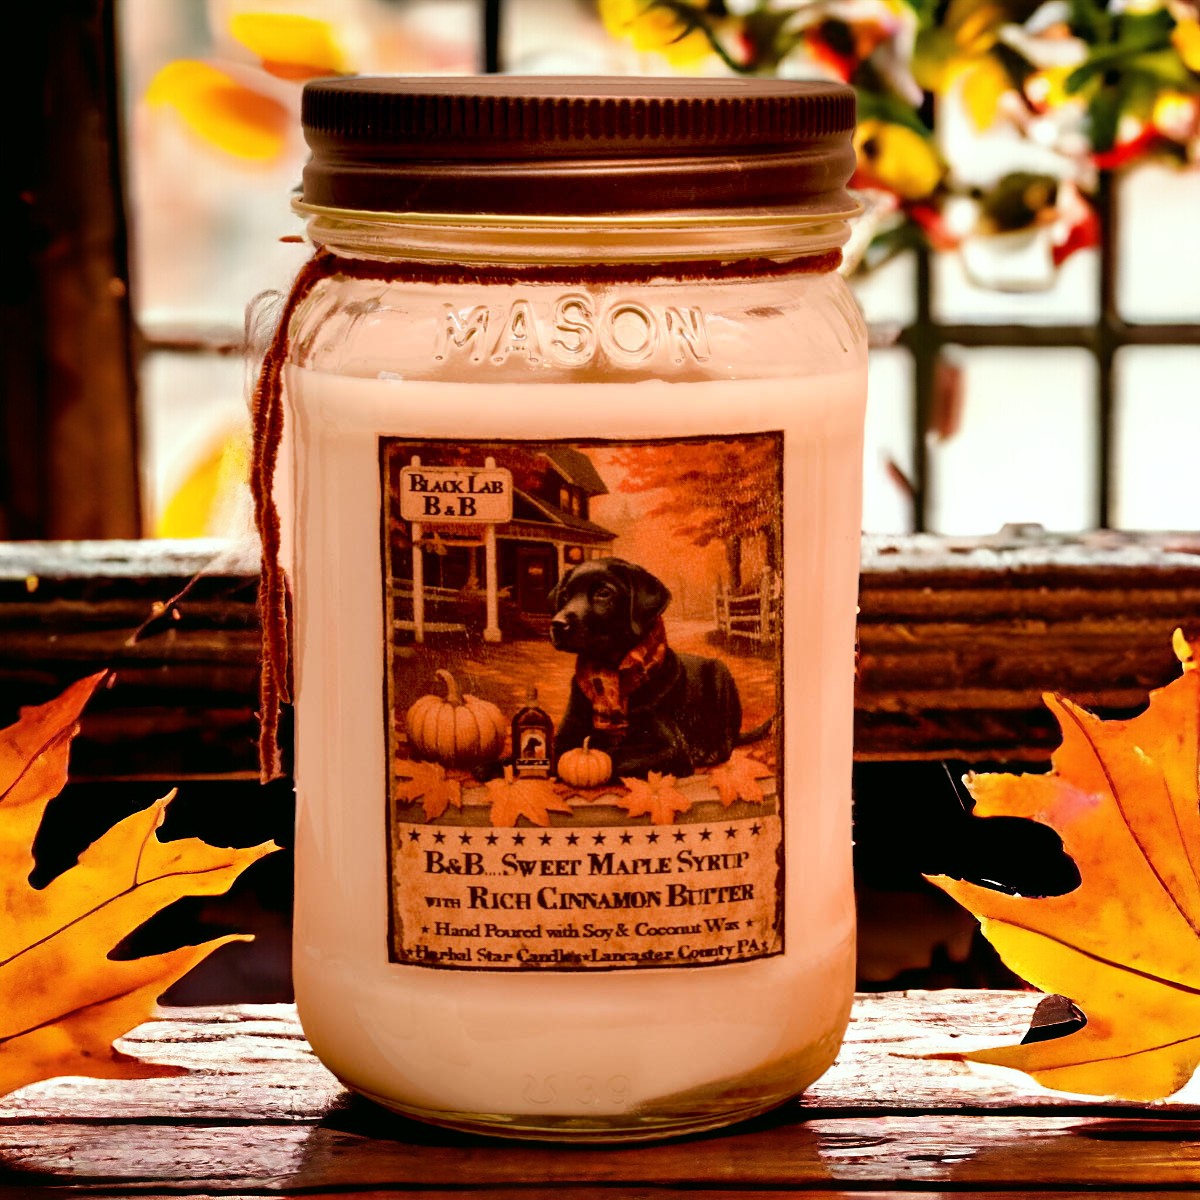 BED AND BREAKFAST JAR CANDLE – 16 oz